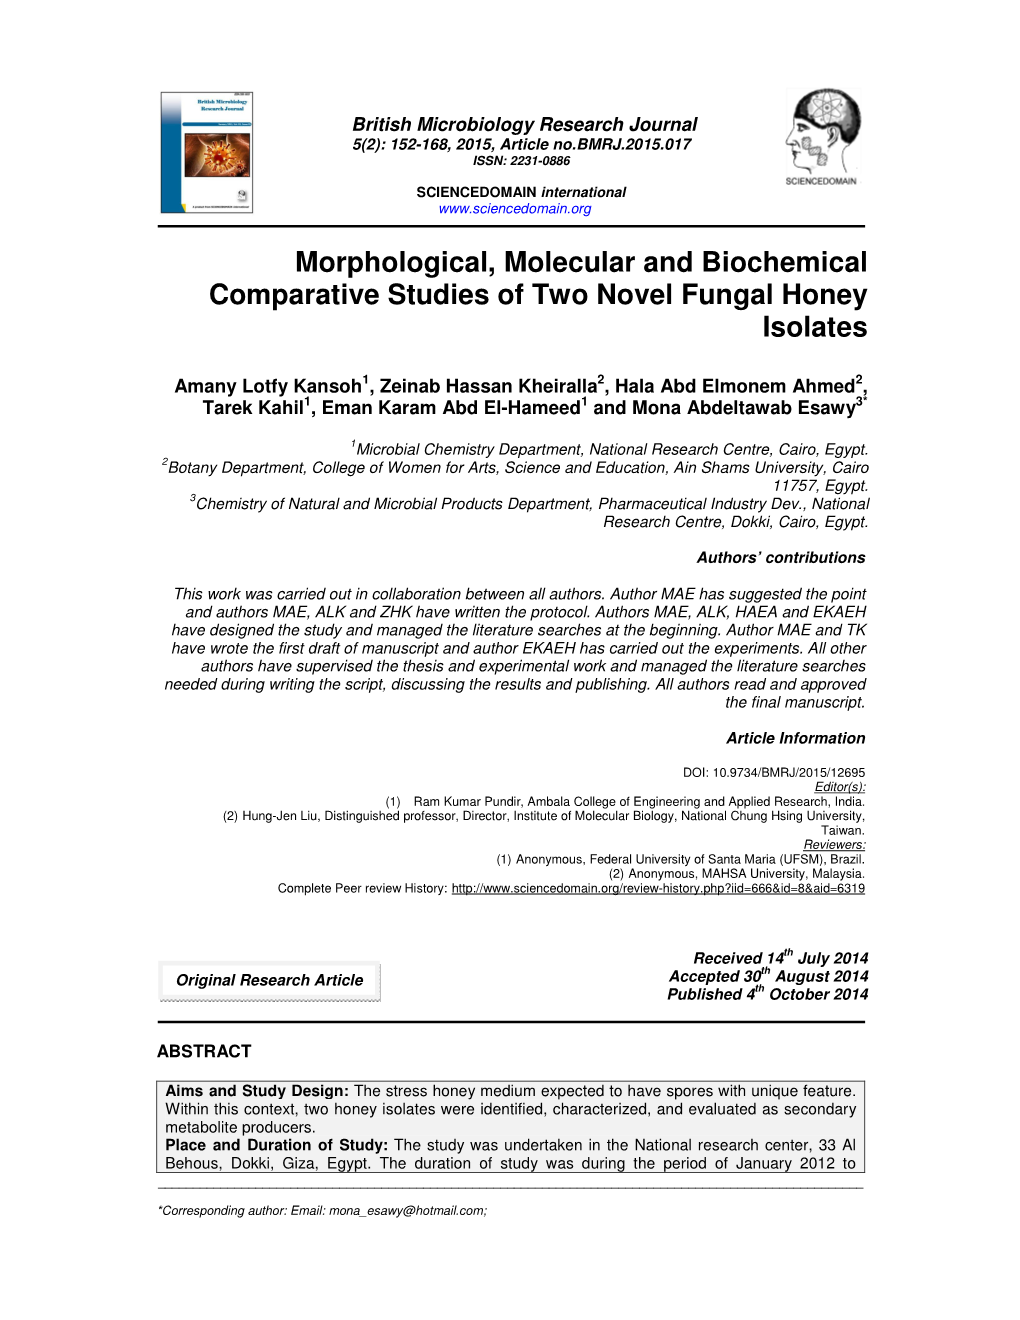 Morphological, Molecular and Biochemical Comparative Studies of Two Novel Fungal Honey Isolates